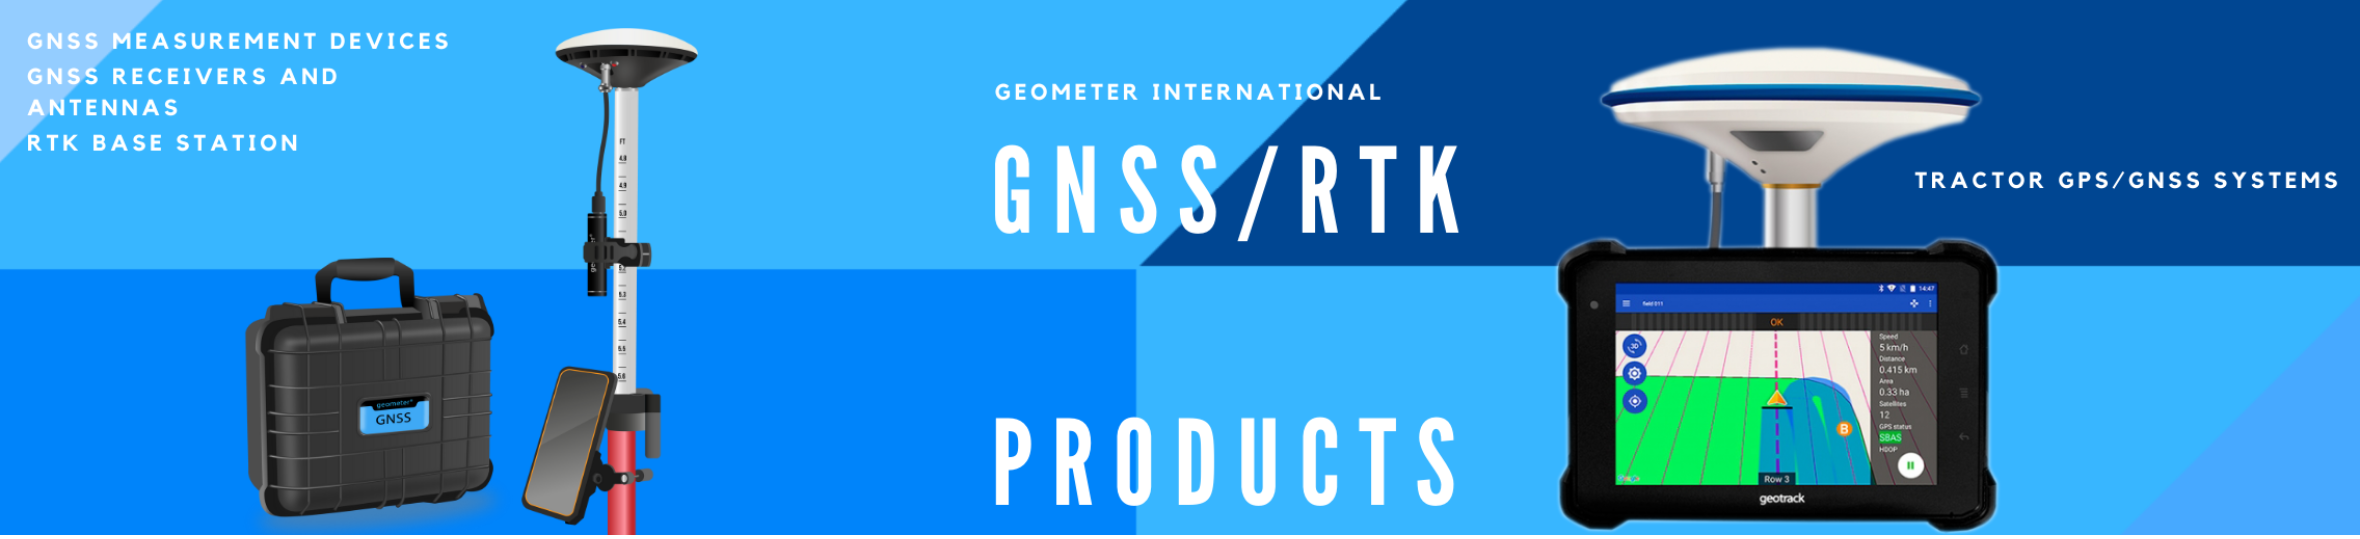 gnss-rtk-products1.png